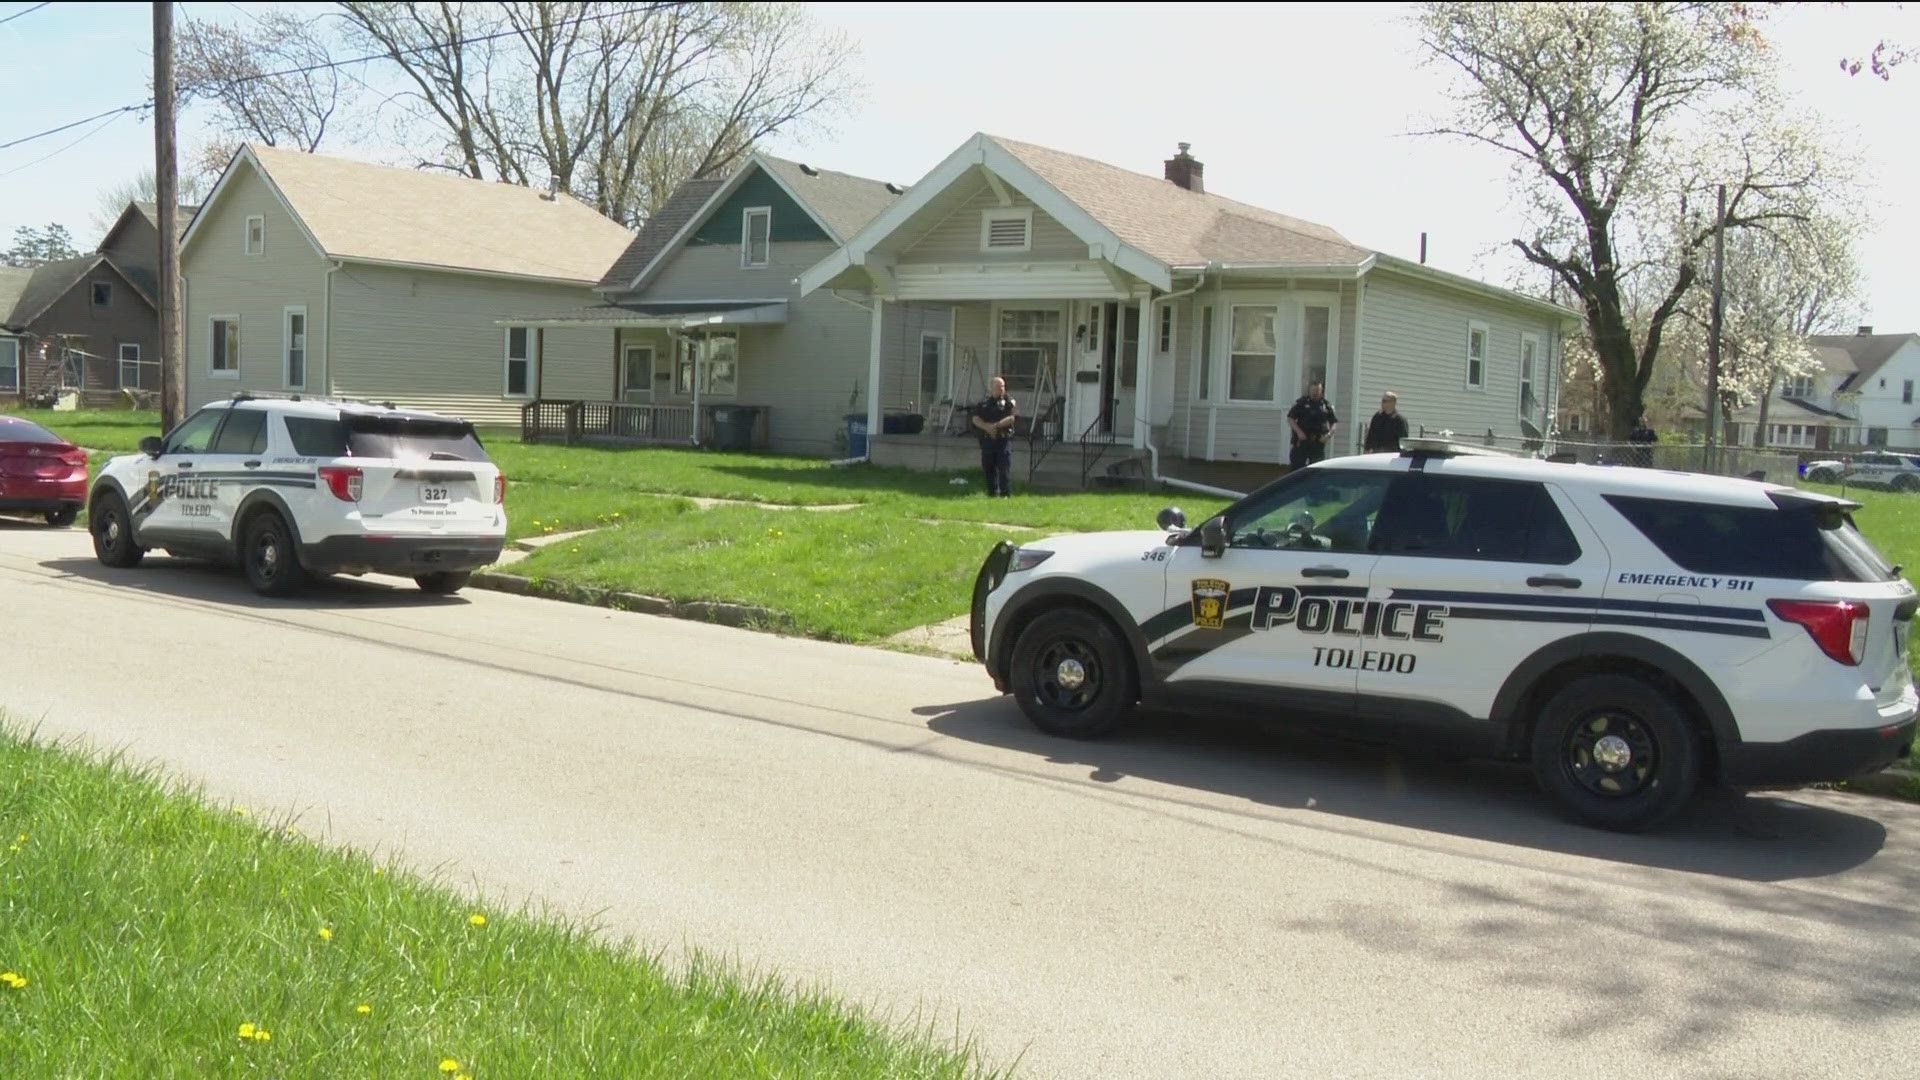 Toledo police said U.S. Marshals were serving a search warrant when the man allegedly pulled a gun and was shot.